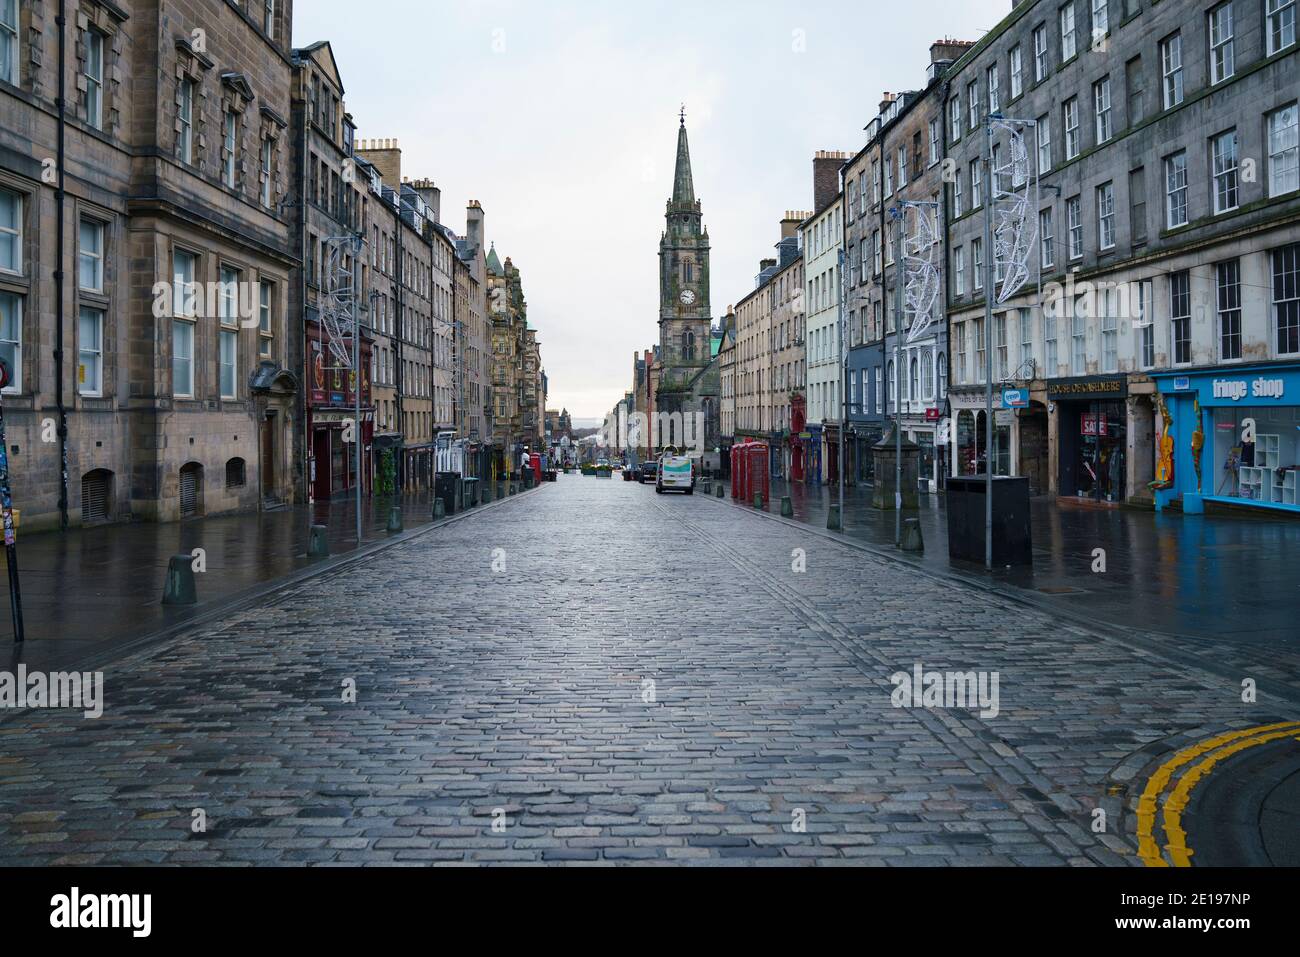 Edinburgh, Scotland, UK. 5 January 2021. Views of a virtually deserted Edinburgh City Centre as Scotland wakes up to the first day of a new strict national lockdown announced by Scottish Government to contain new upsurge in Covid-19 infections. Pic; The Royal Mile in the Old town is almost deserted with no tourists evident.   Iain Masterton/Alamy Live News Stock Photo